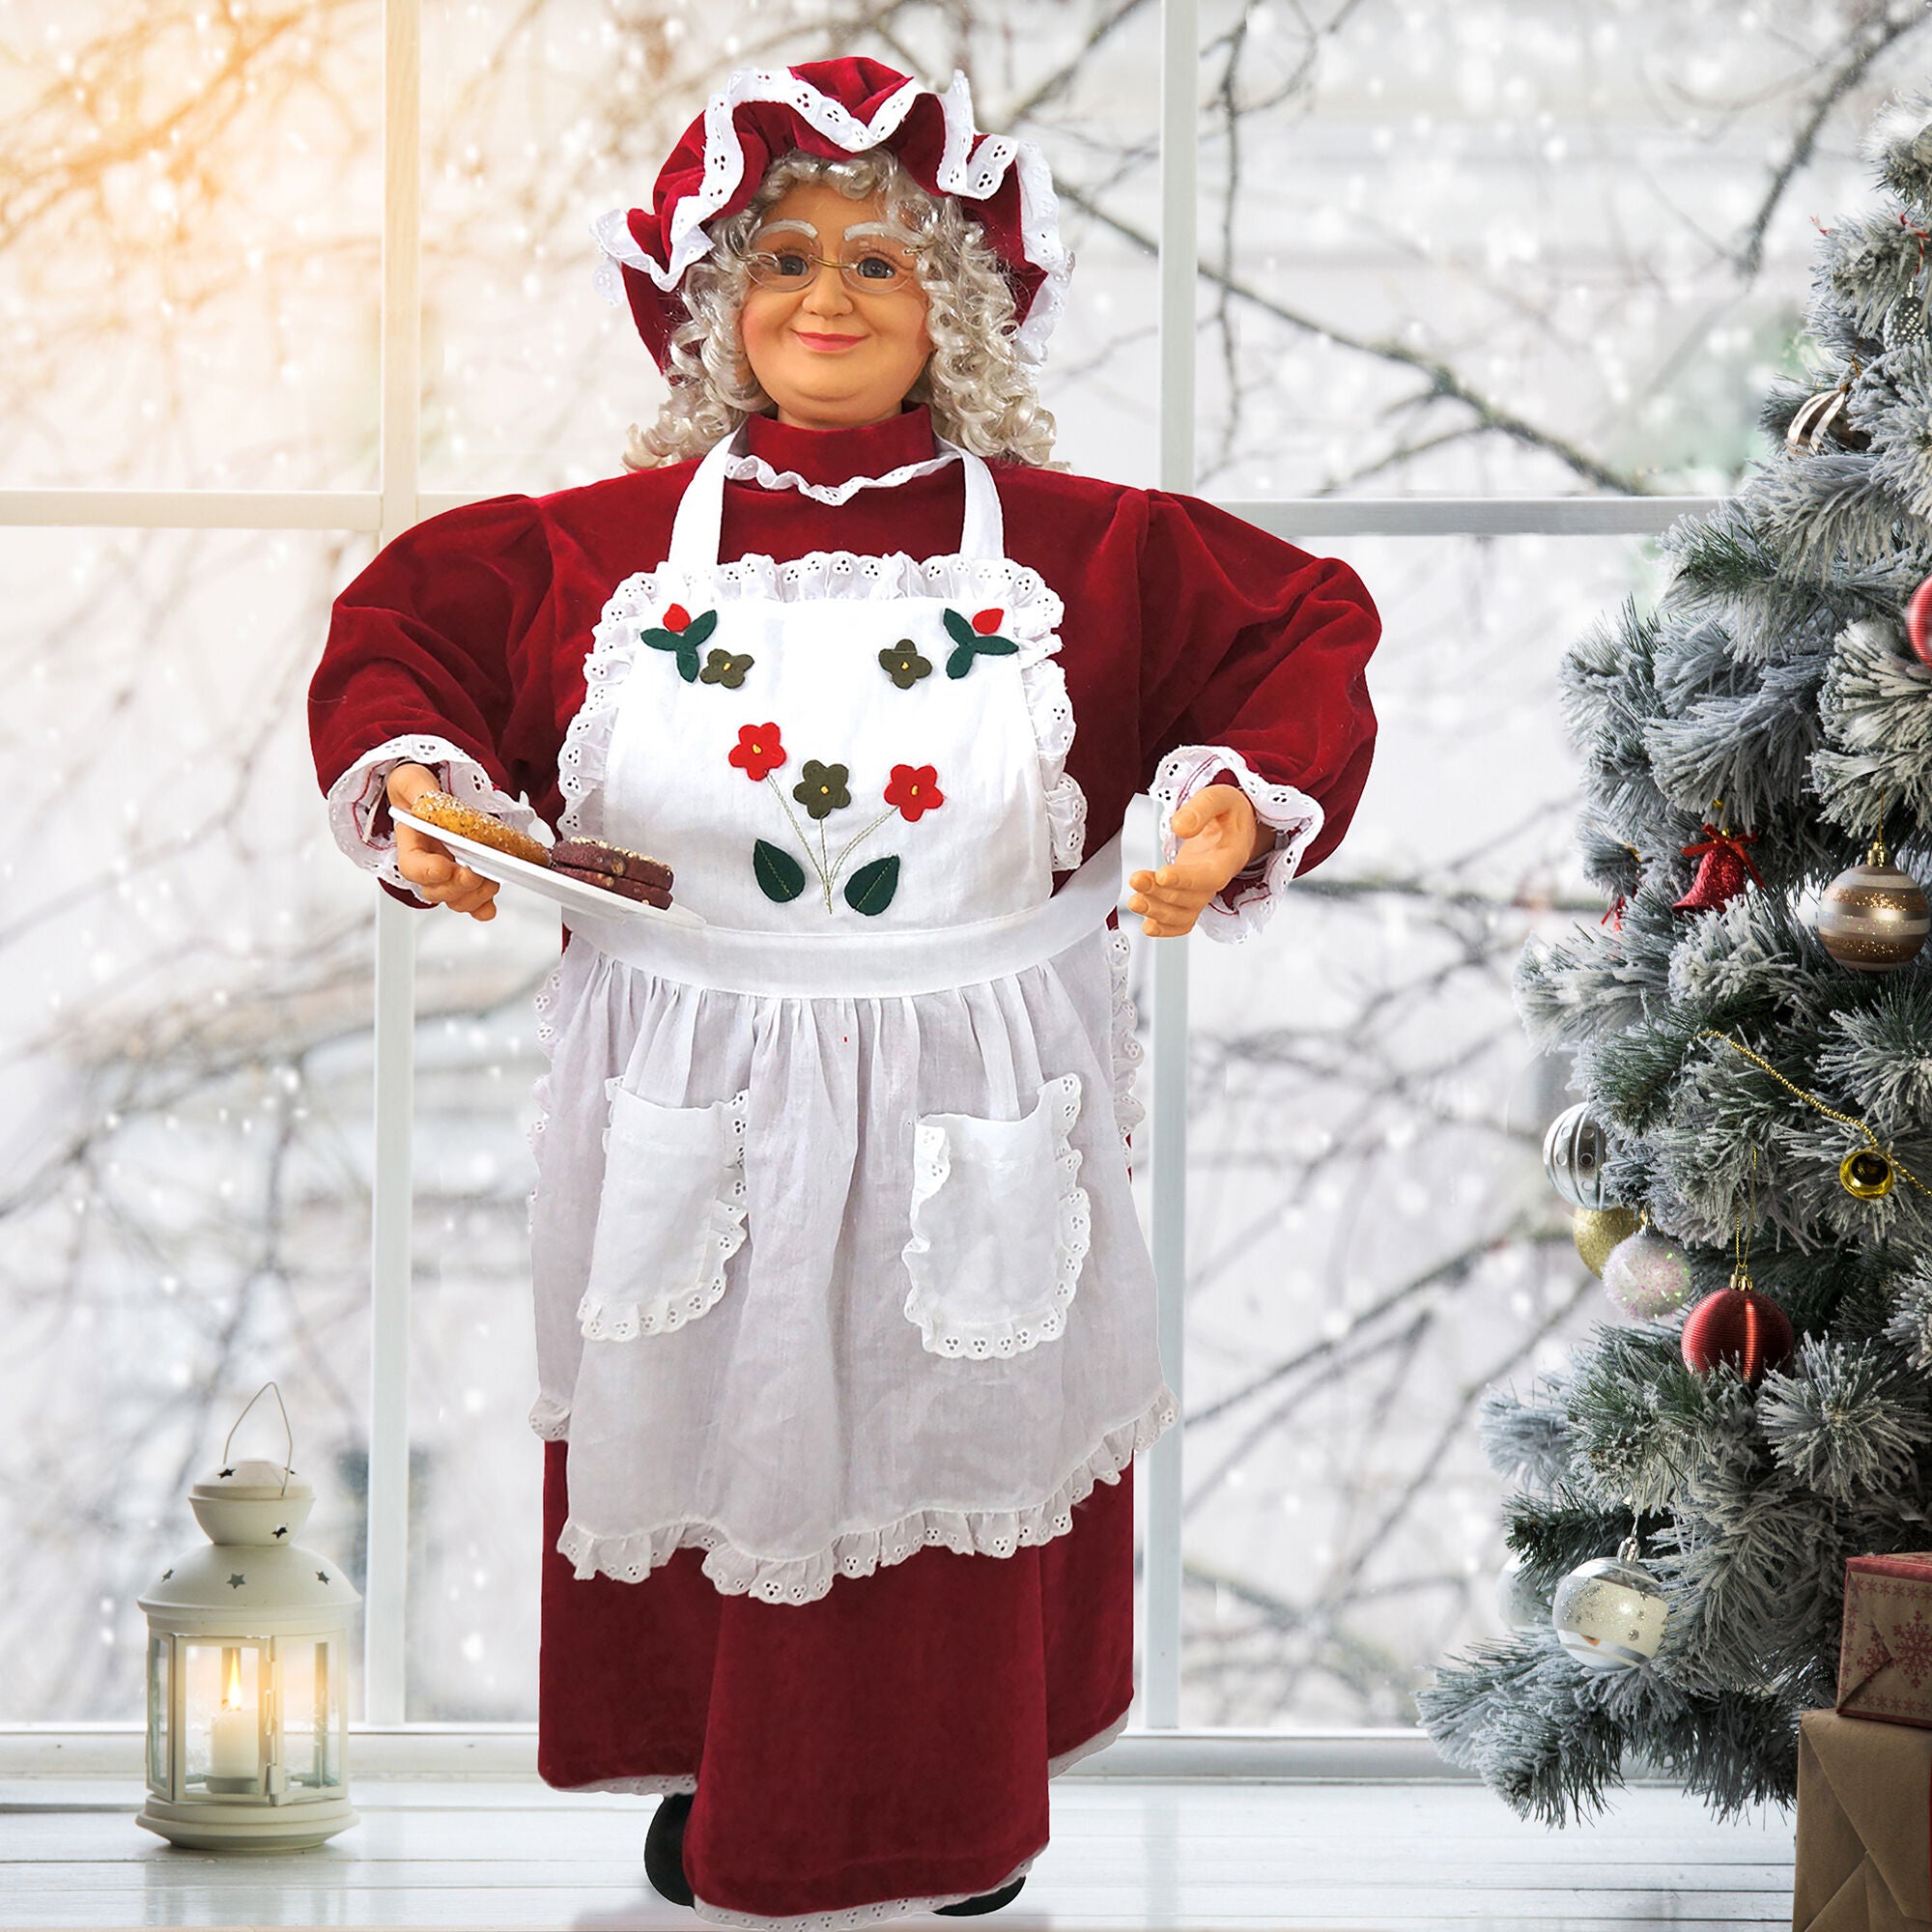 Fraser Hill Farm -  3-Ft. Music and Motion Baking Mrs. Claus with Baking Apron and Cookies, Christmas Animatronic